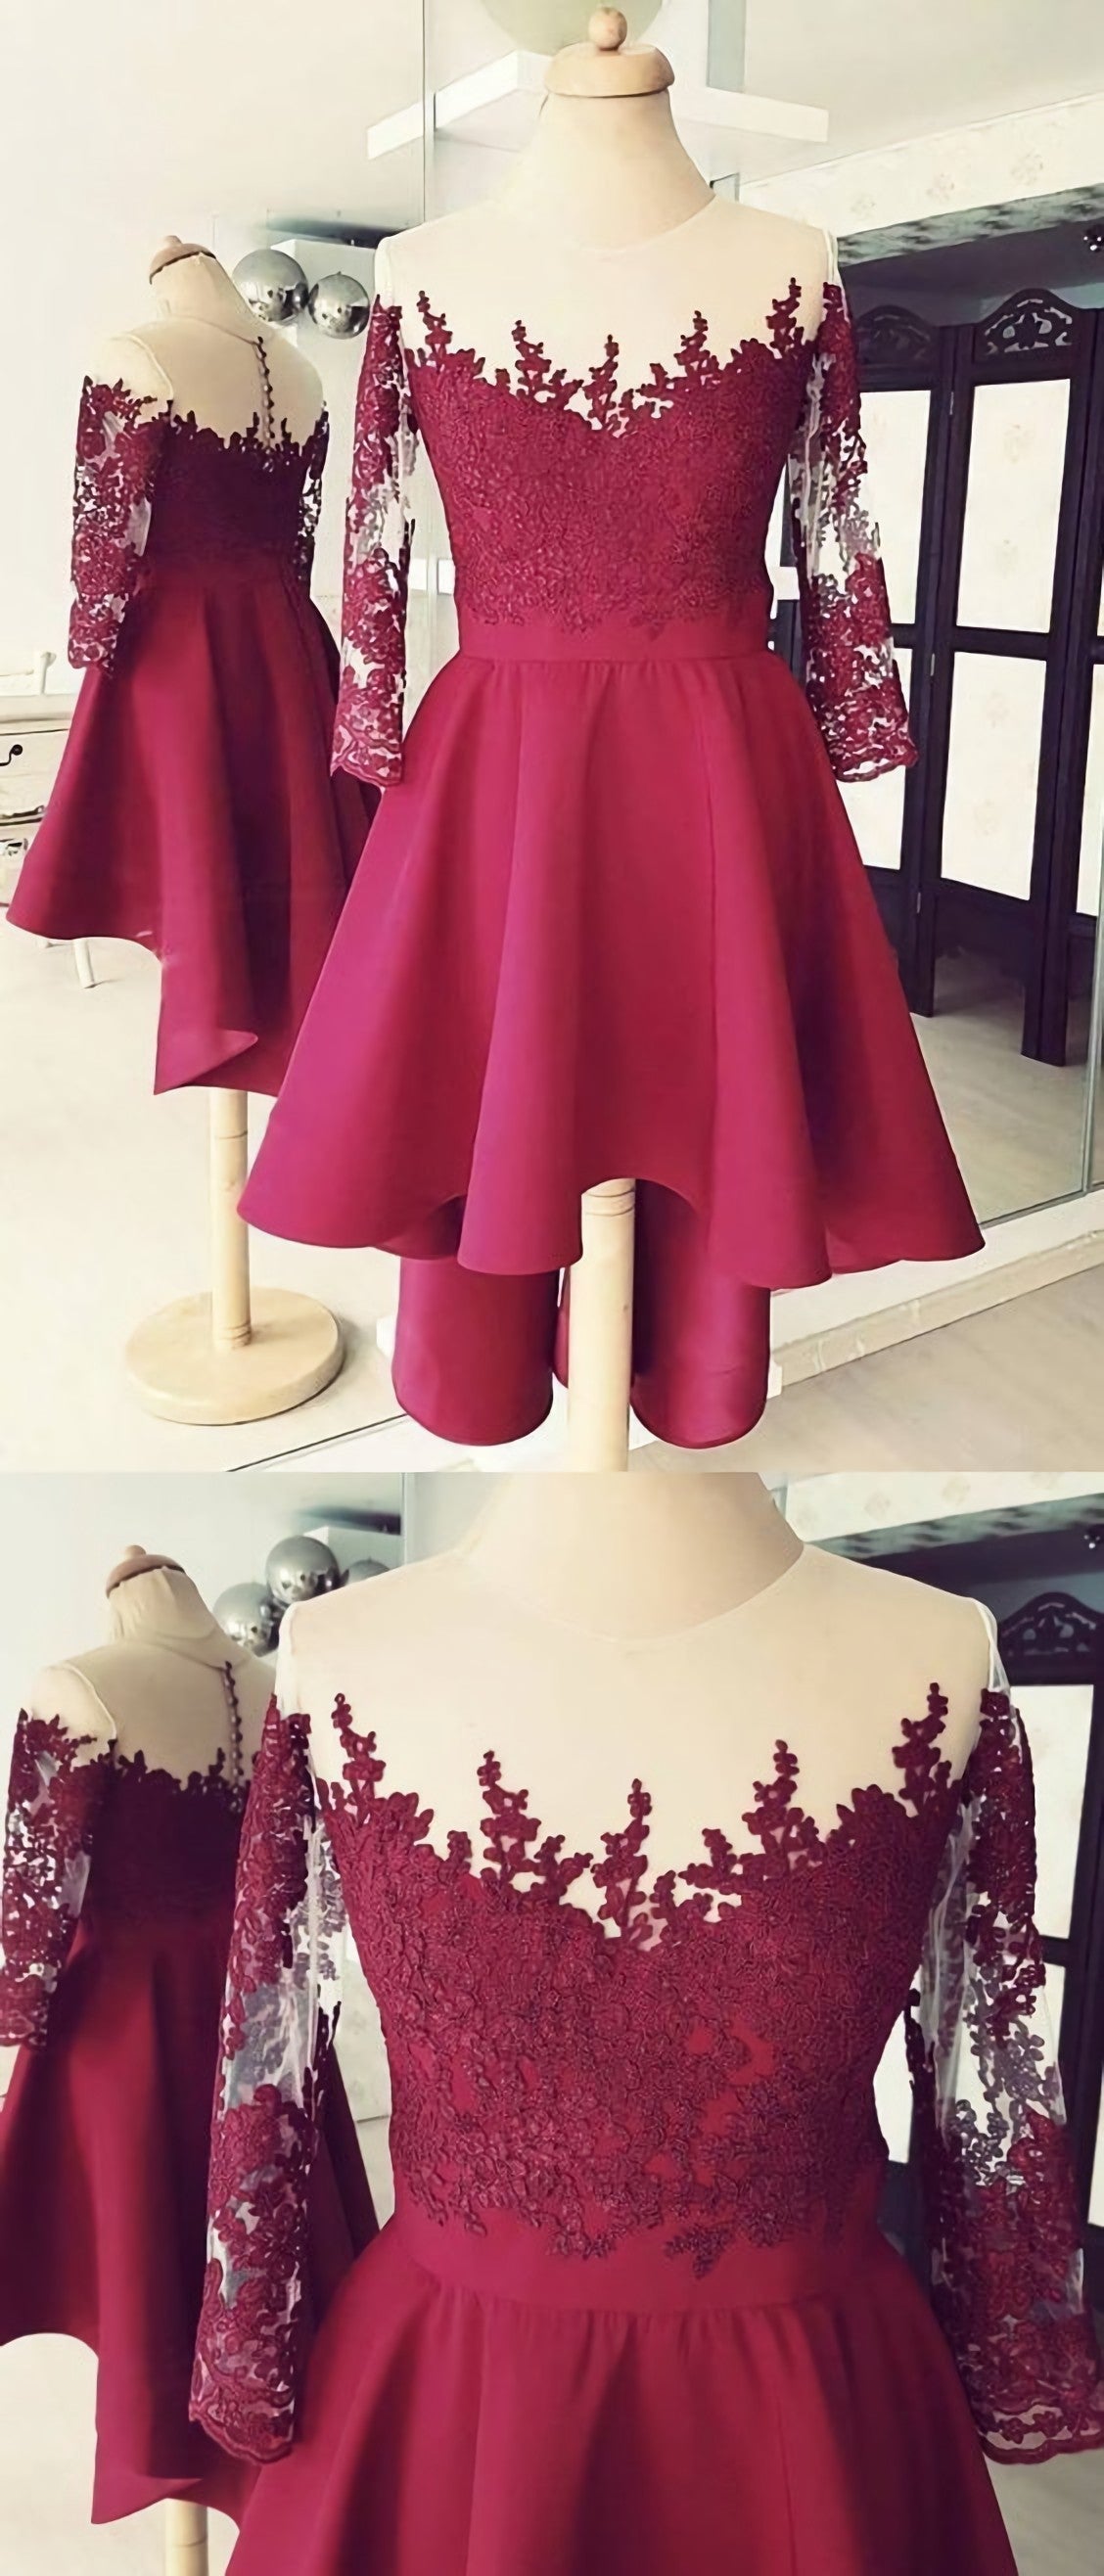 Cute High Low Lace Applique Burgundy Corset Homecoming Dress, Short Corset Prom Dress, E0744 outfit, Formal Dress For Ladies